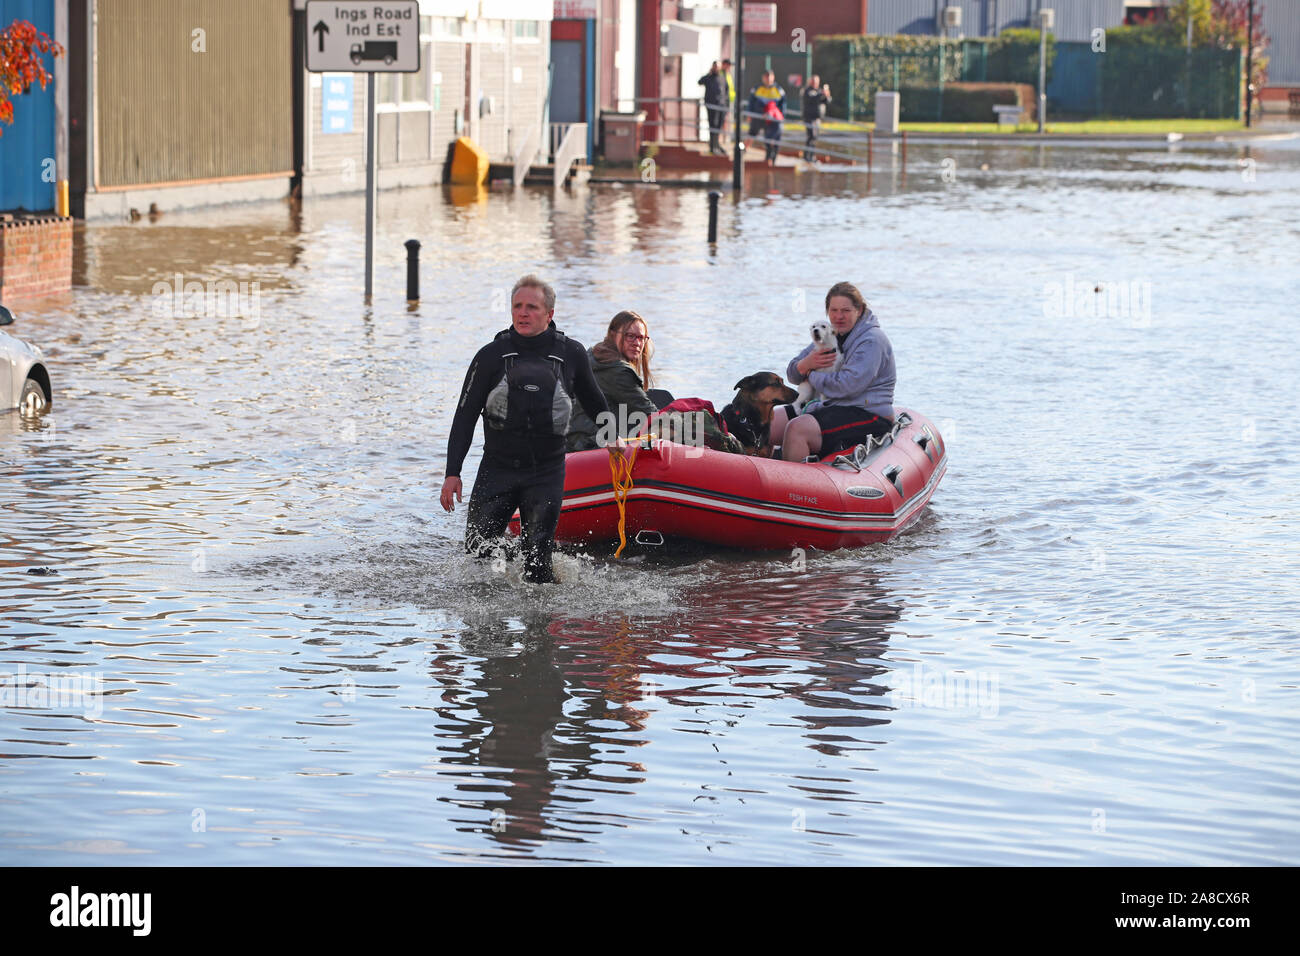 People are being taken to safety in boats on Yarborough Terrace in Doncaster, Yorkshire, as parts of England endured a month's worth of rain in 24 hours, with scores of people rescued or forced to evacuate their homes, others stranded overnight in a shopping centre, and travel plans thrown into chaos. Stock Photo